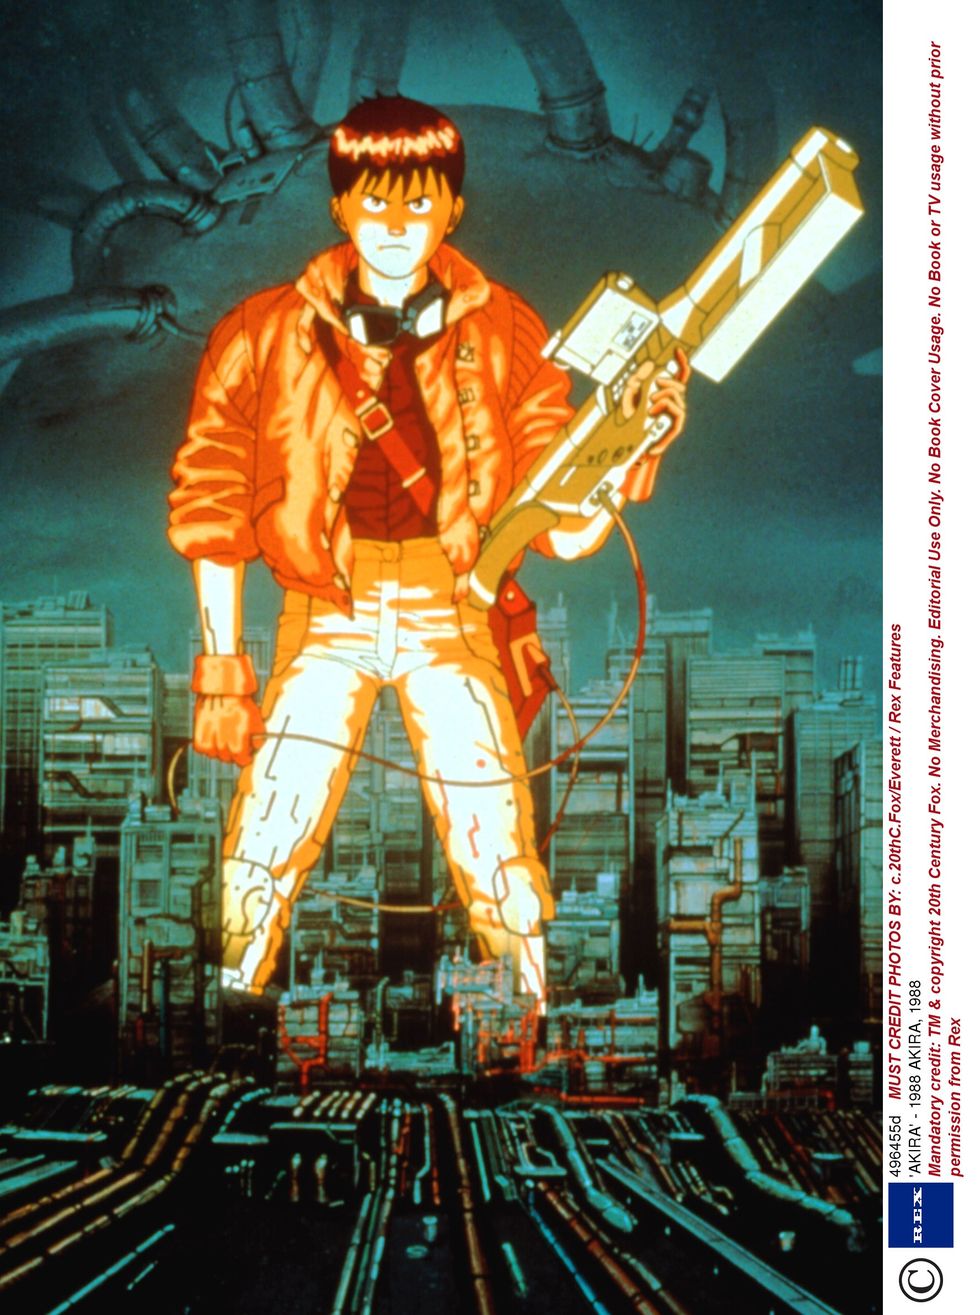 Top 5 Things We Want In A Live-Action Akira Film